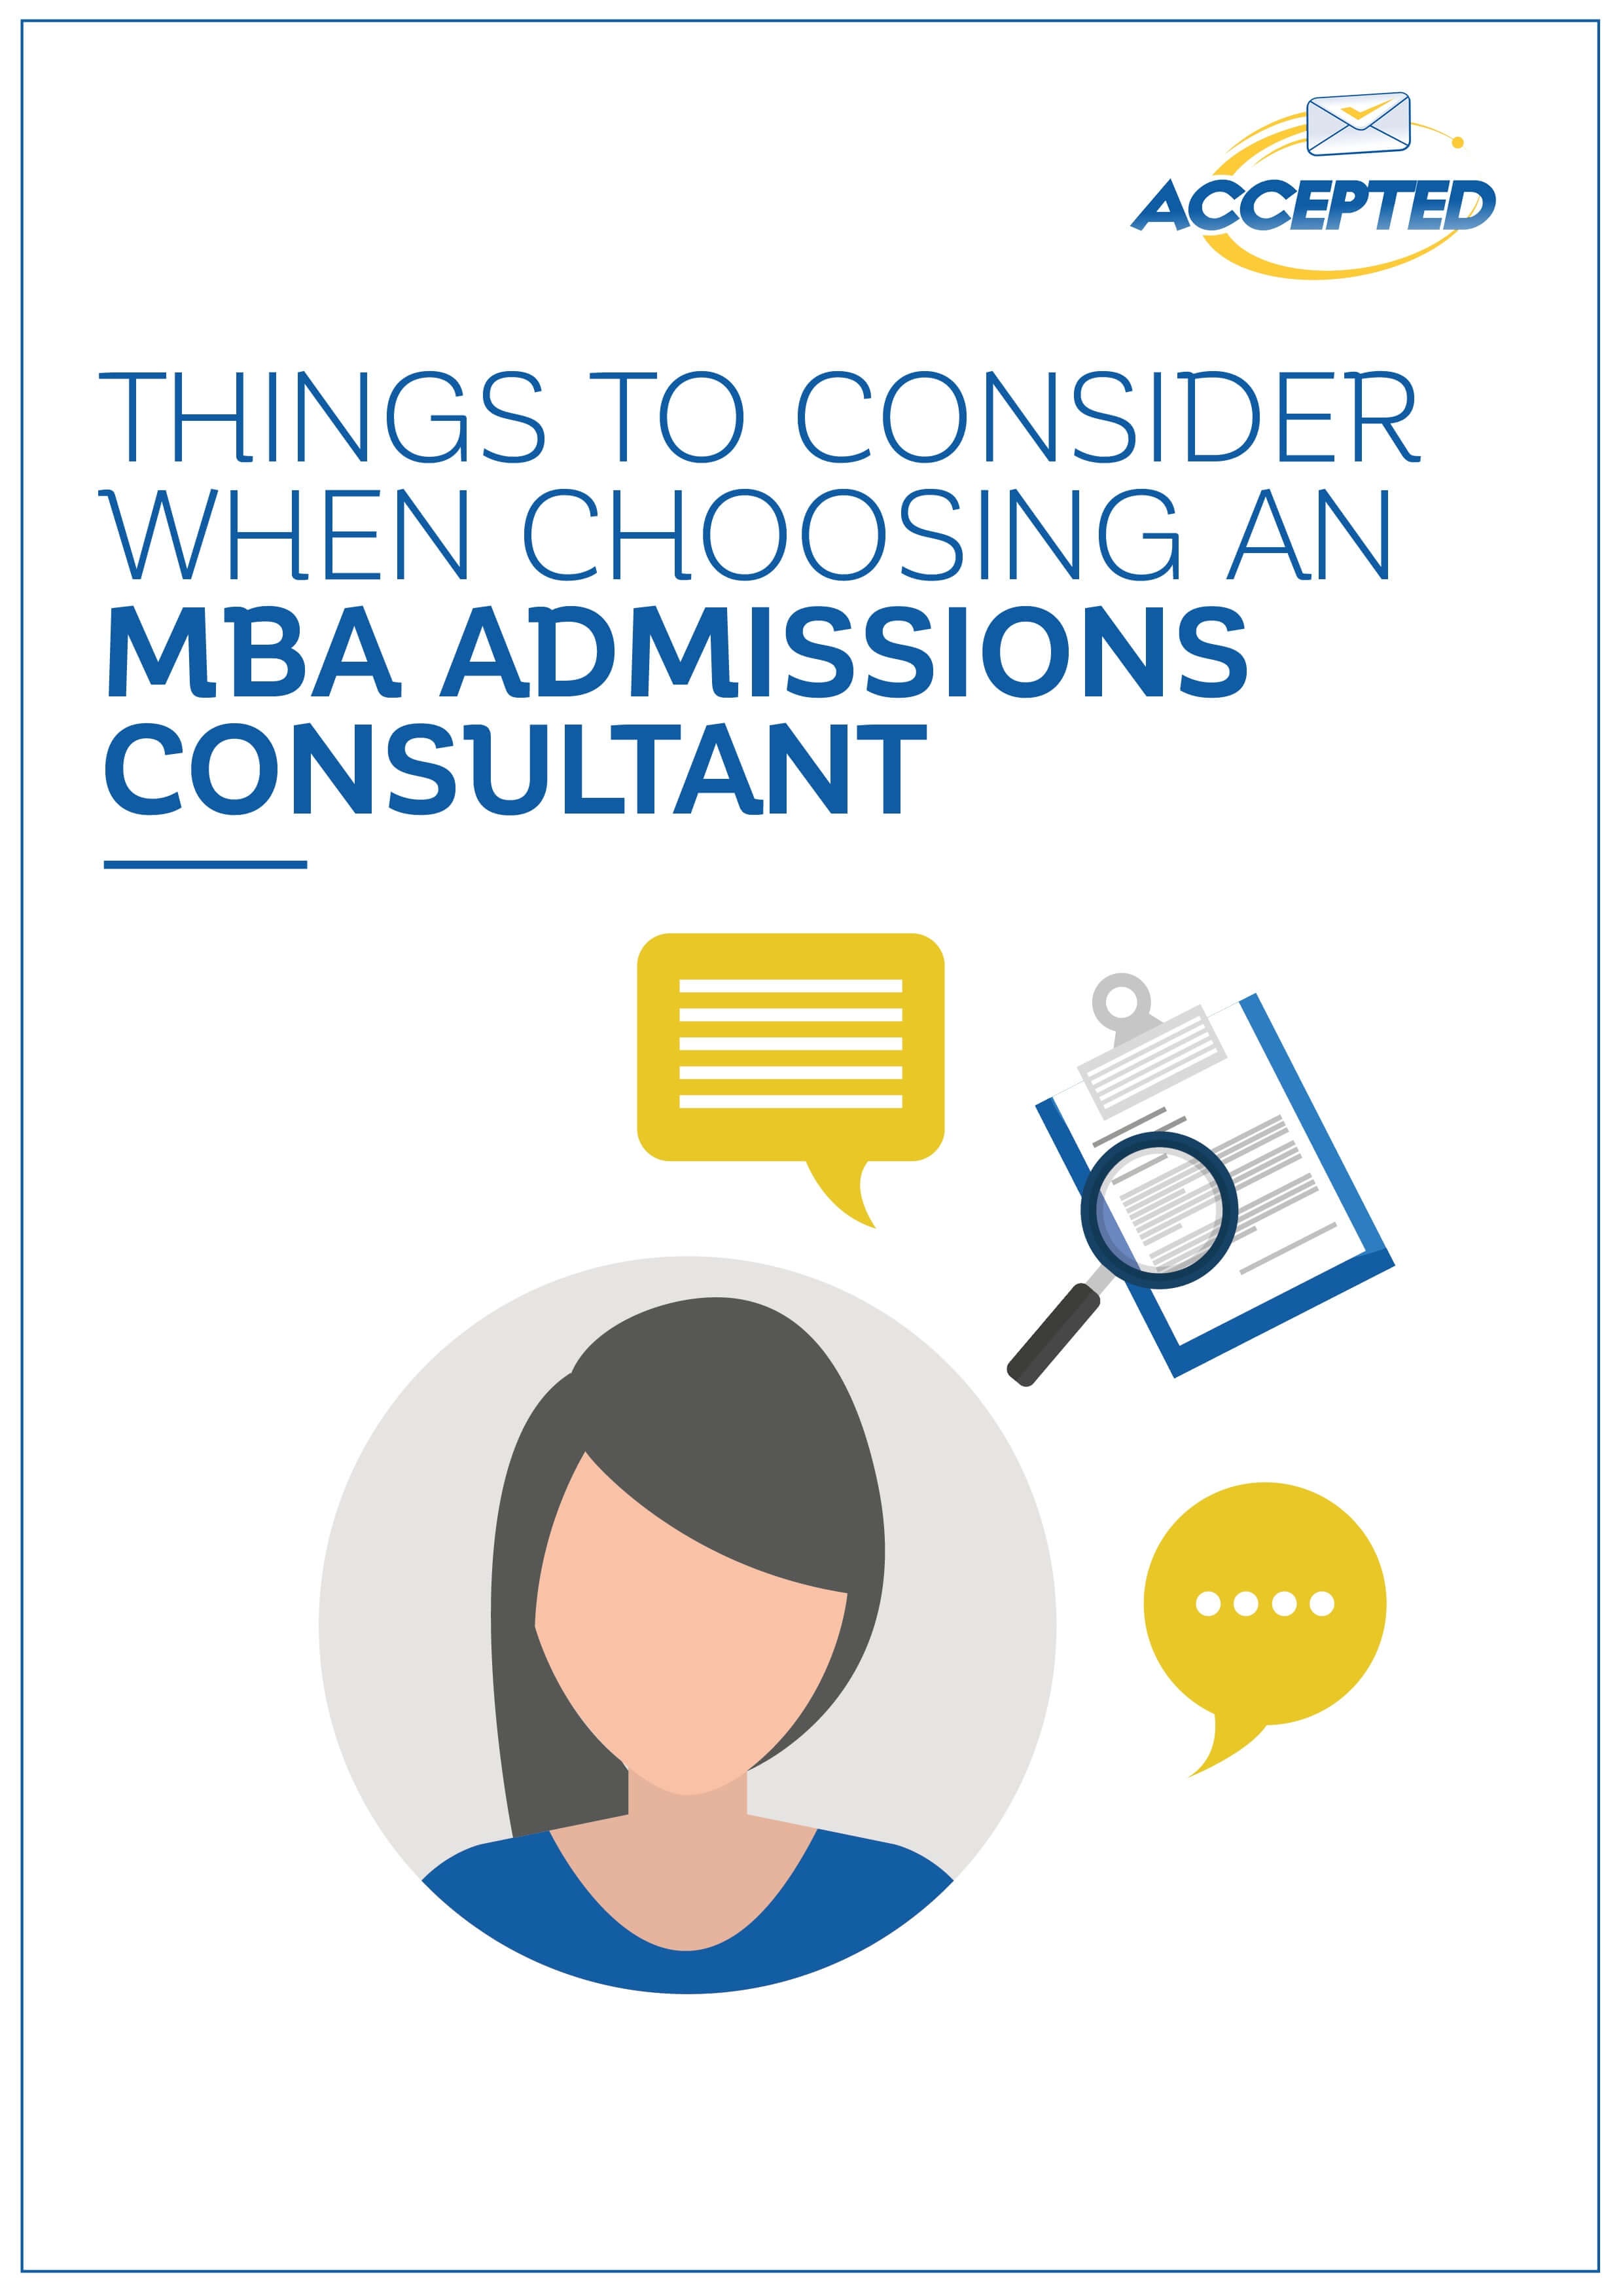 Choosing an MBA Admissions Consultant